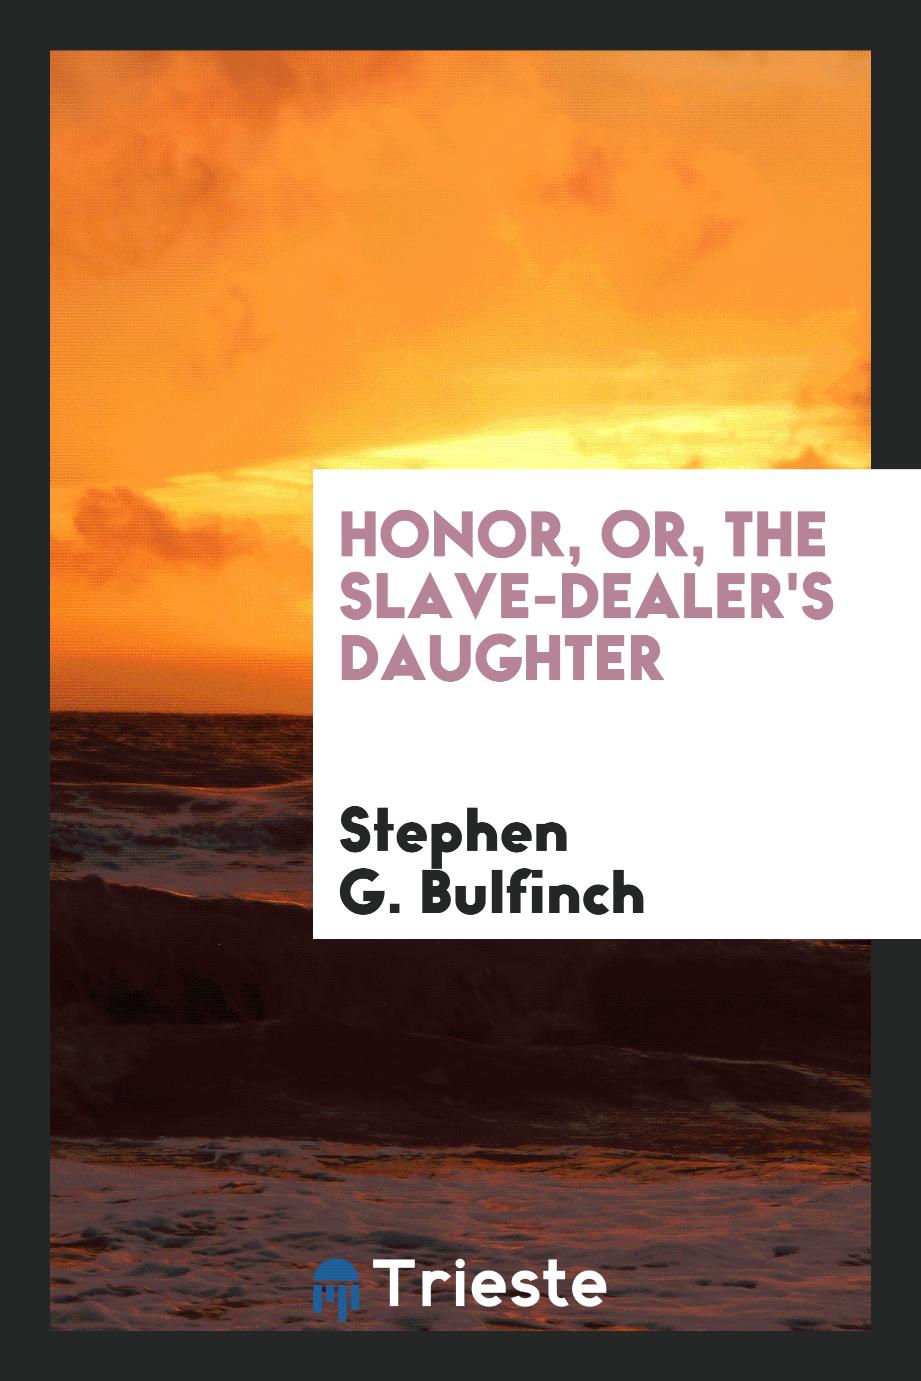 Honor, or, The slave-dealer's daughter